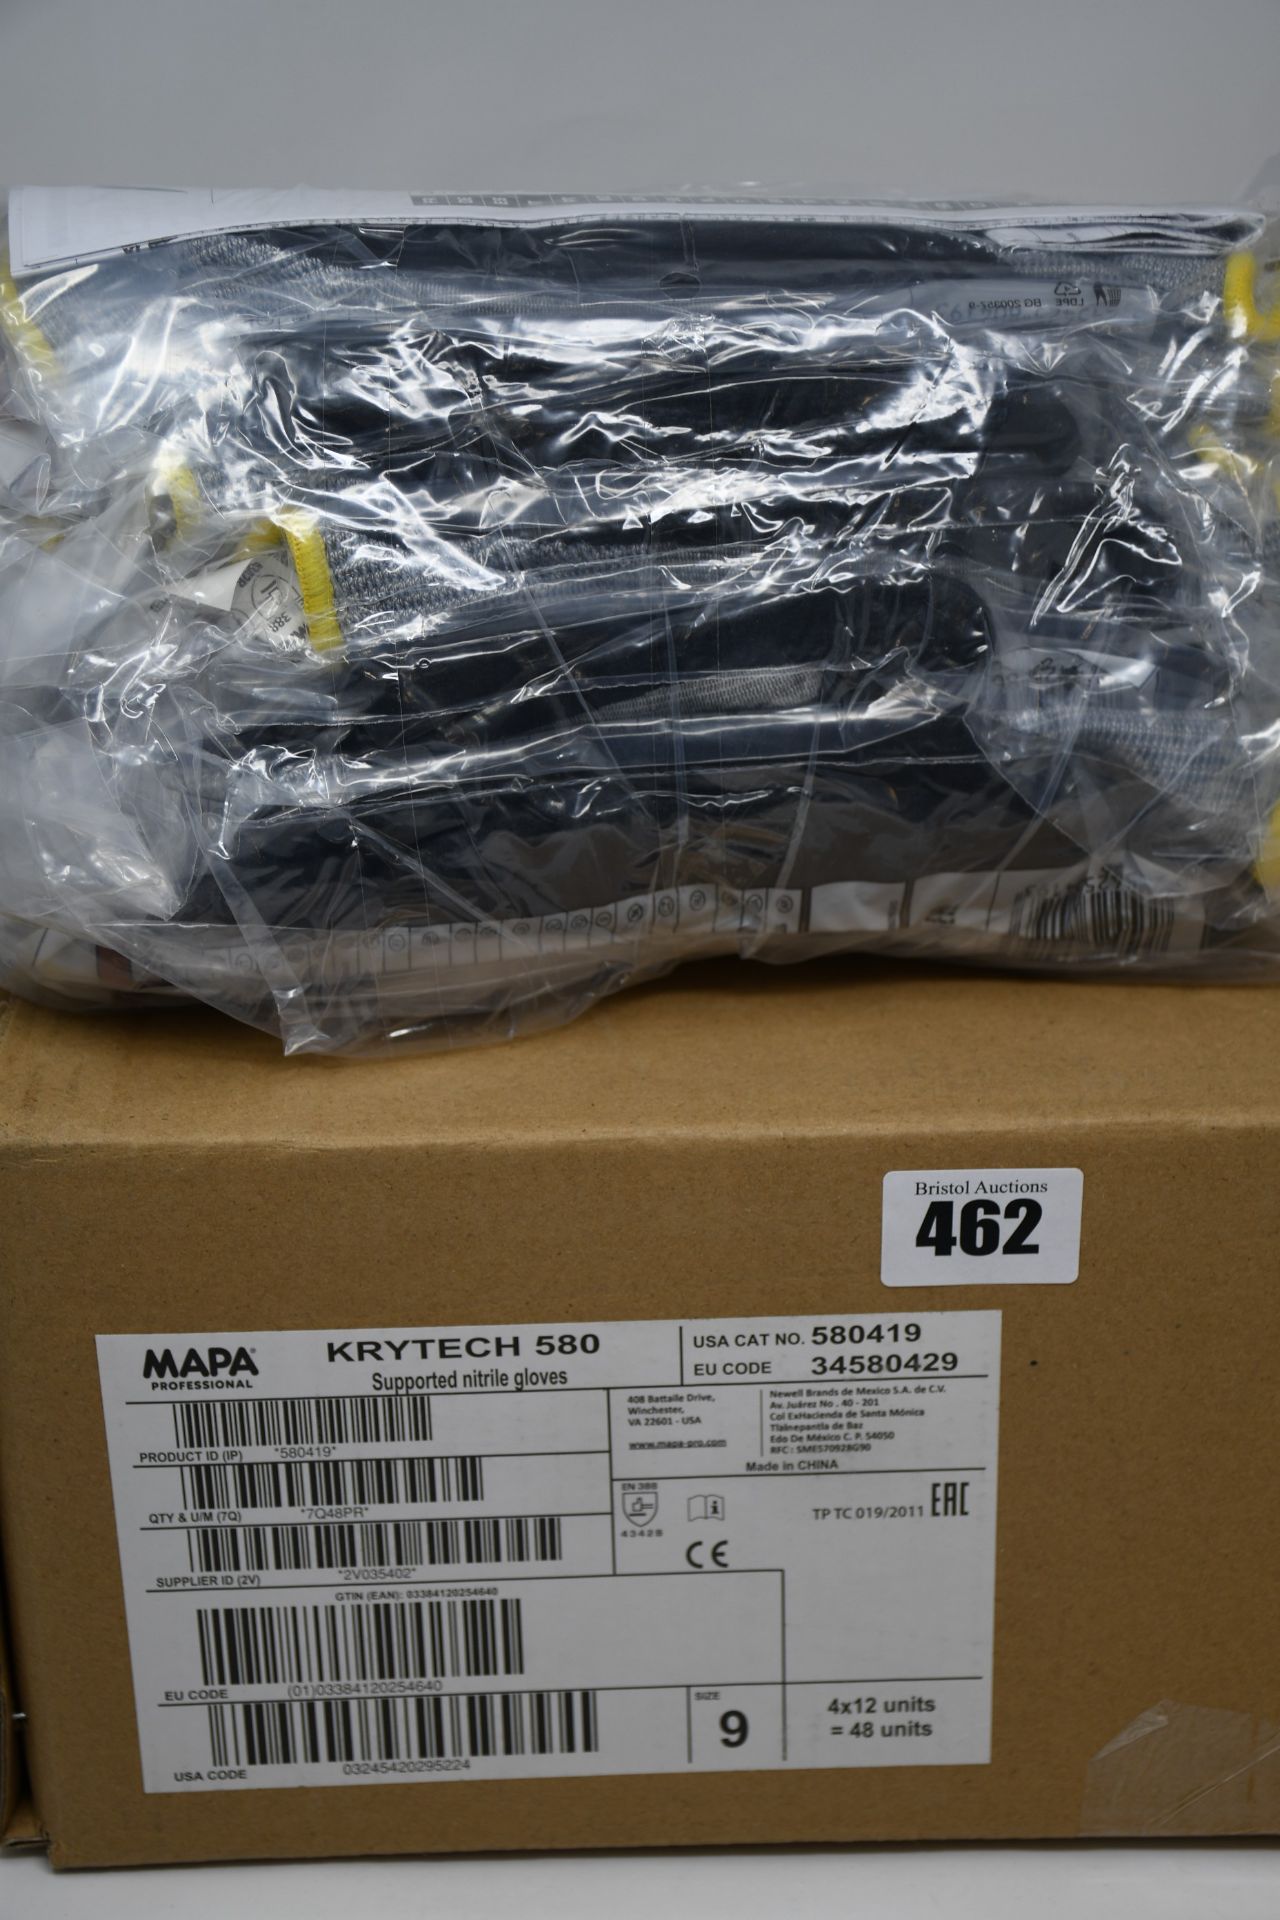 Forty eight pairs of as new Mapa Krytech 580 supported nitrile gloves (Size: 9).